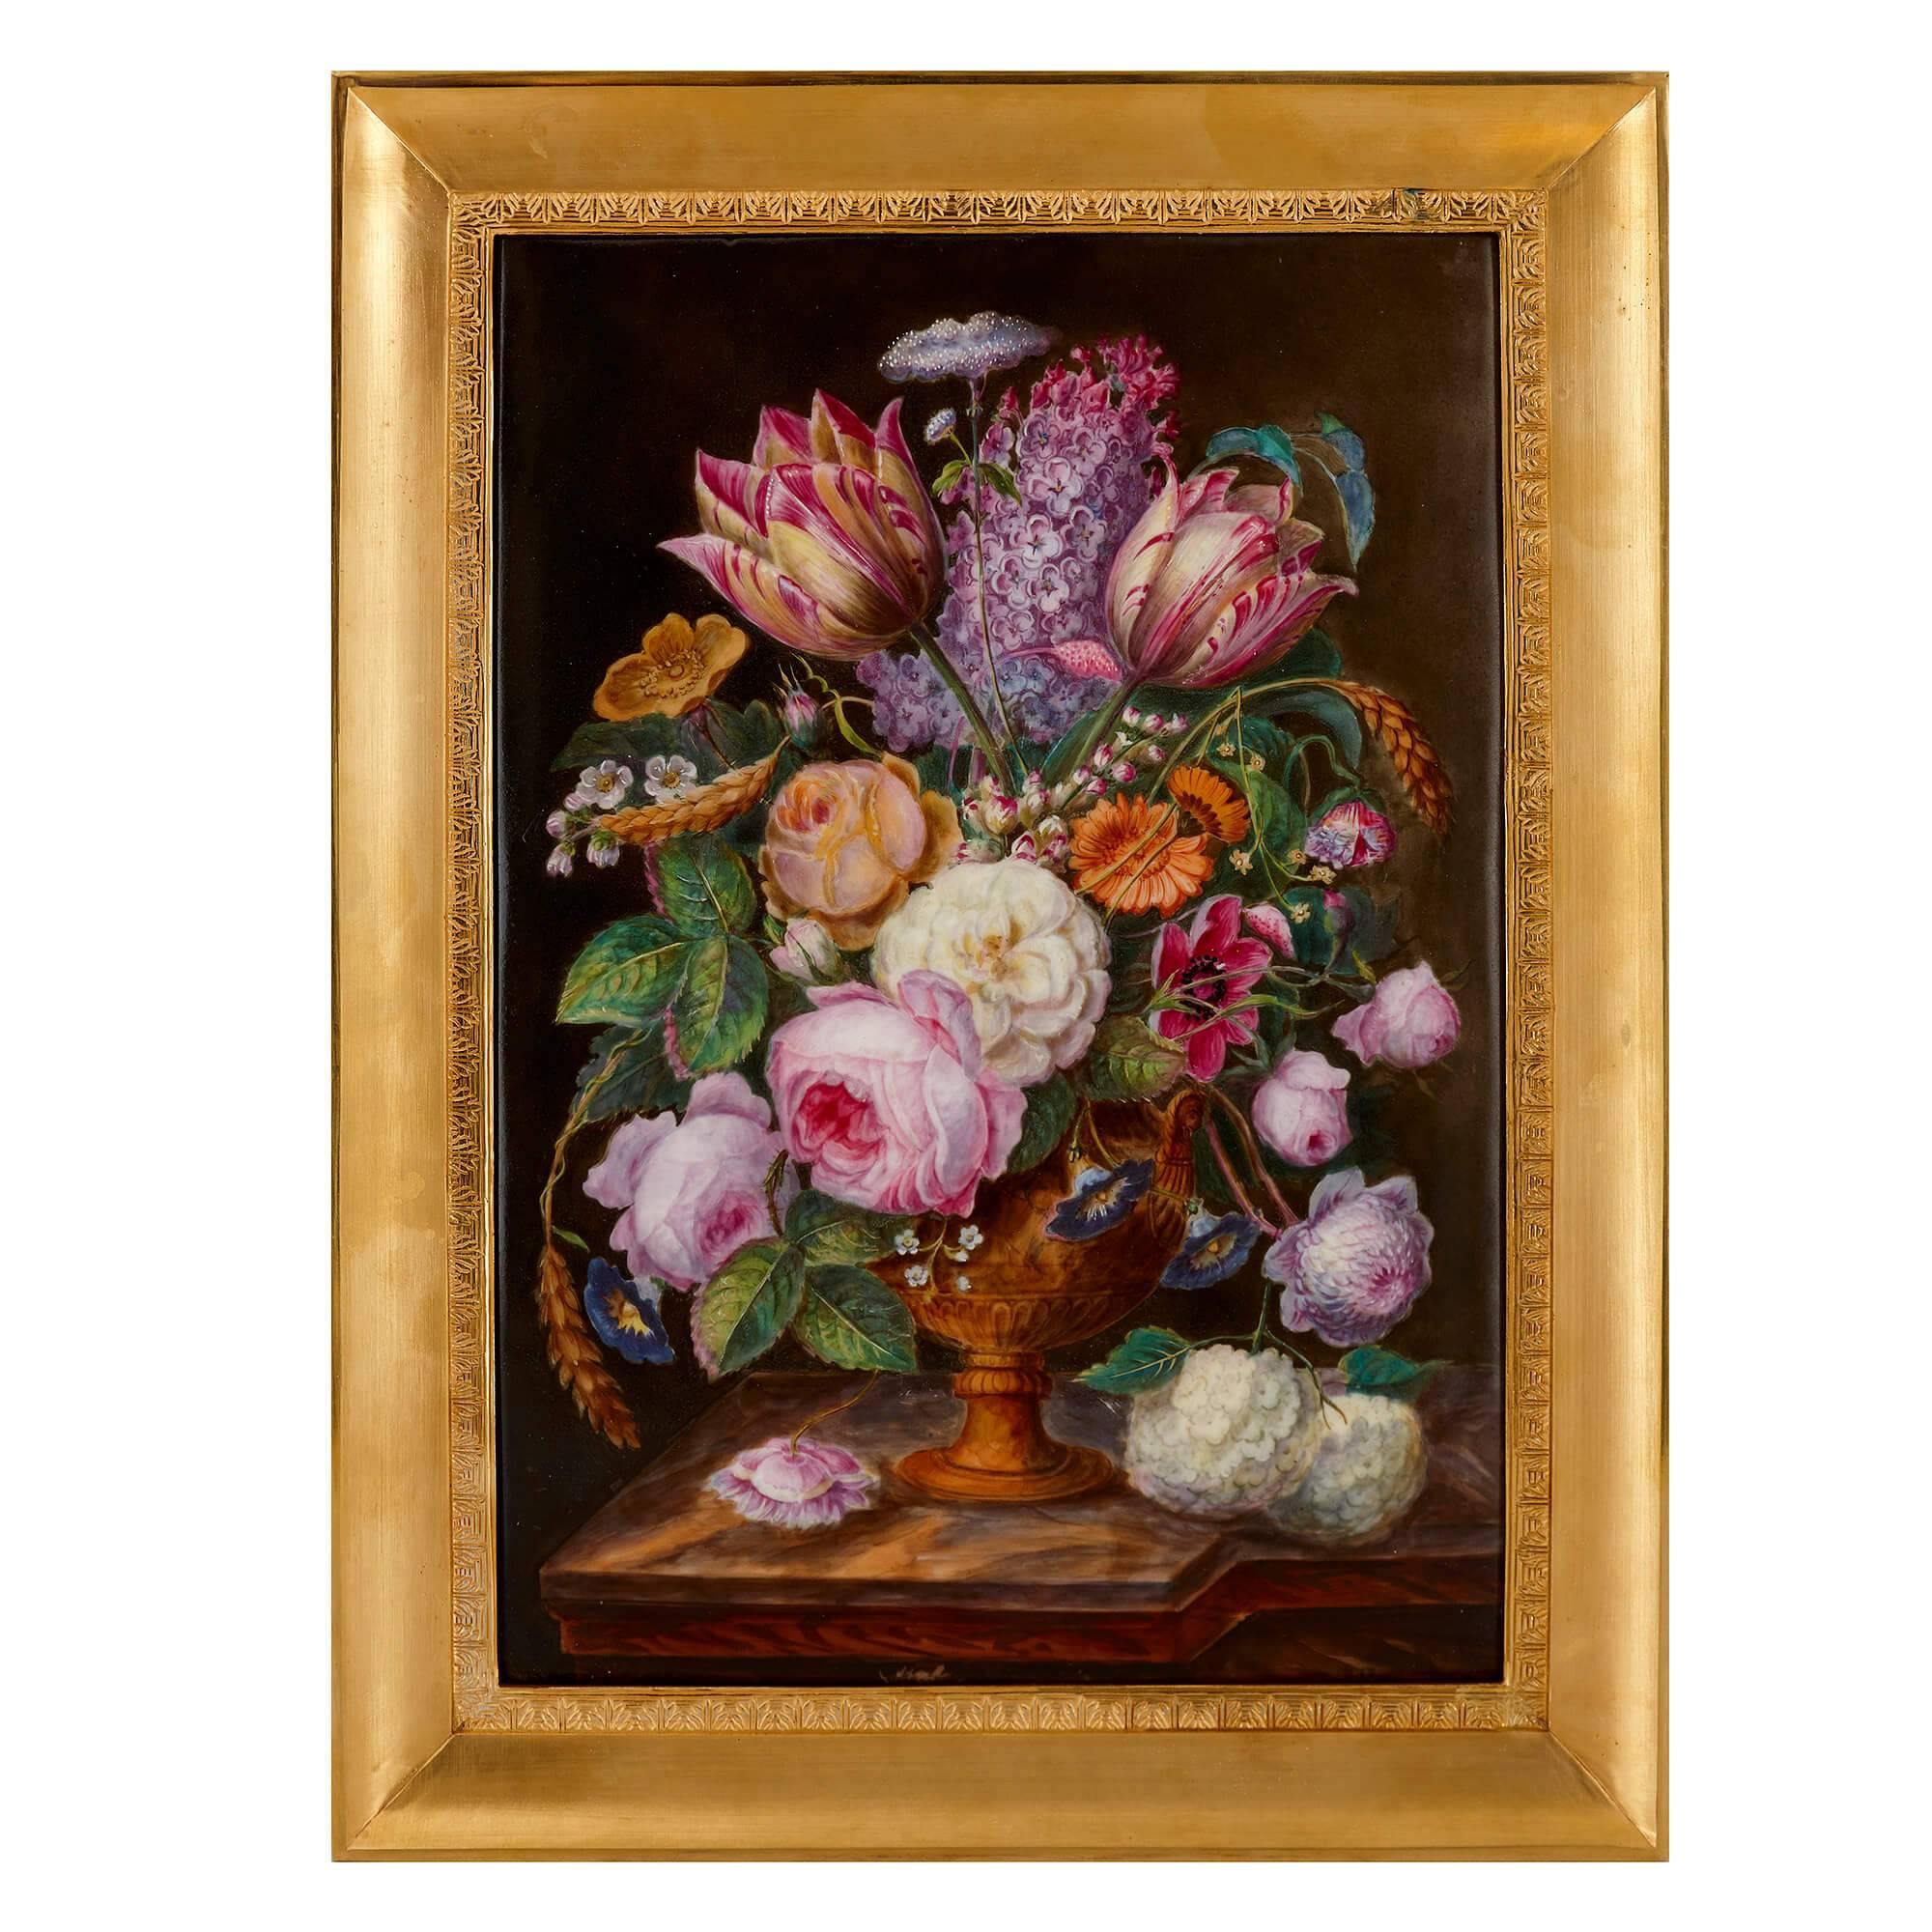 These delicate porcelain plaques are a vision of natural beauty in wild abundance. Each plaque, rectangular in shape, depicts a still life painting of a bountiful floral arrangement in an urn, set against a contrasting dark brown backdrop. The